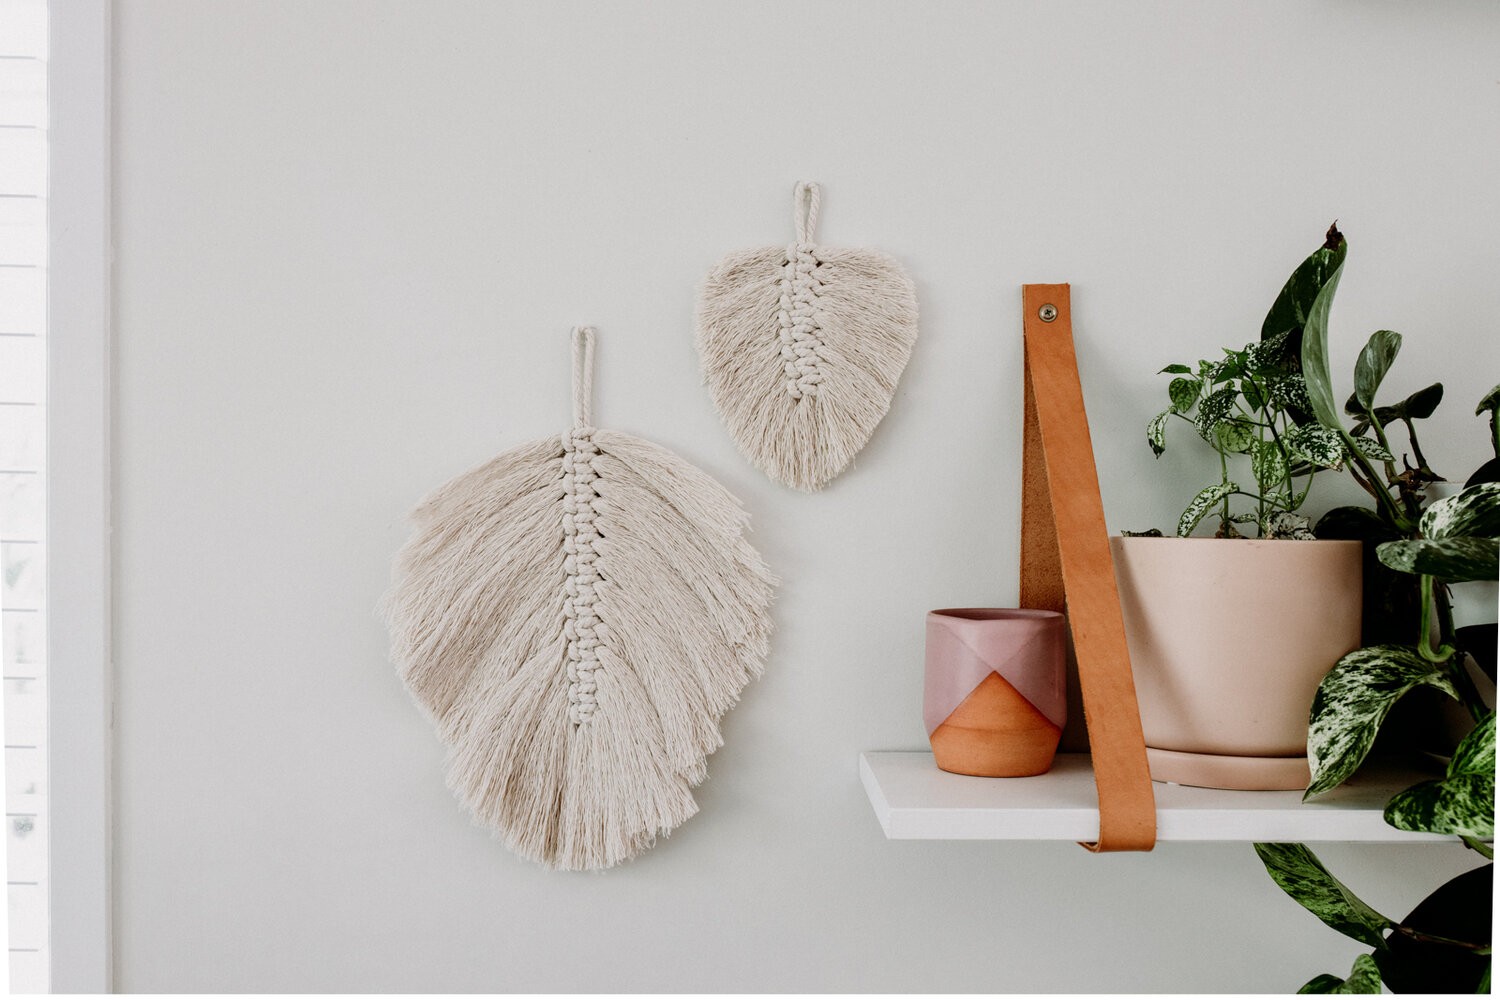 Large and small macrame leaves hang on the wall.